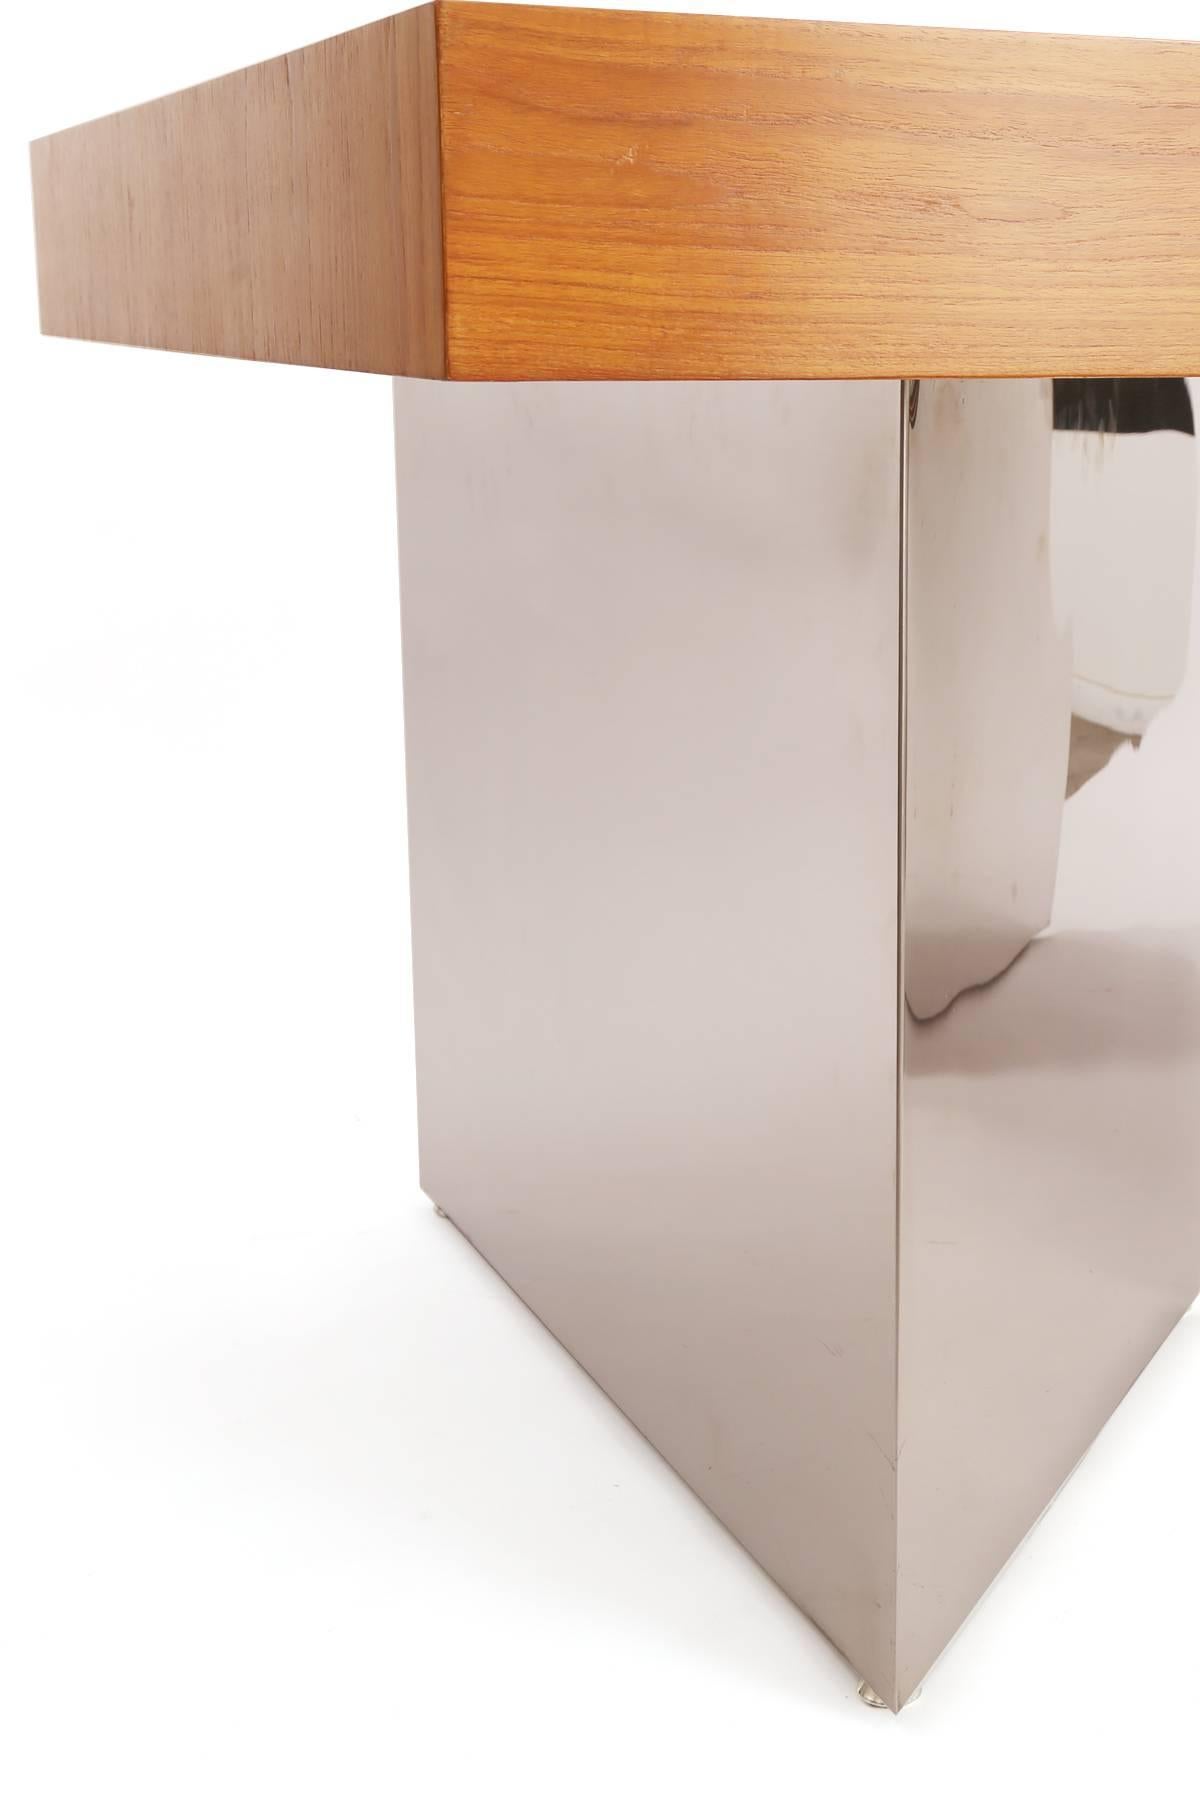 Late 20th Century Stunning Teak and Polished Steel Desk by Pace